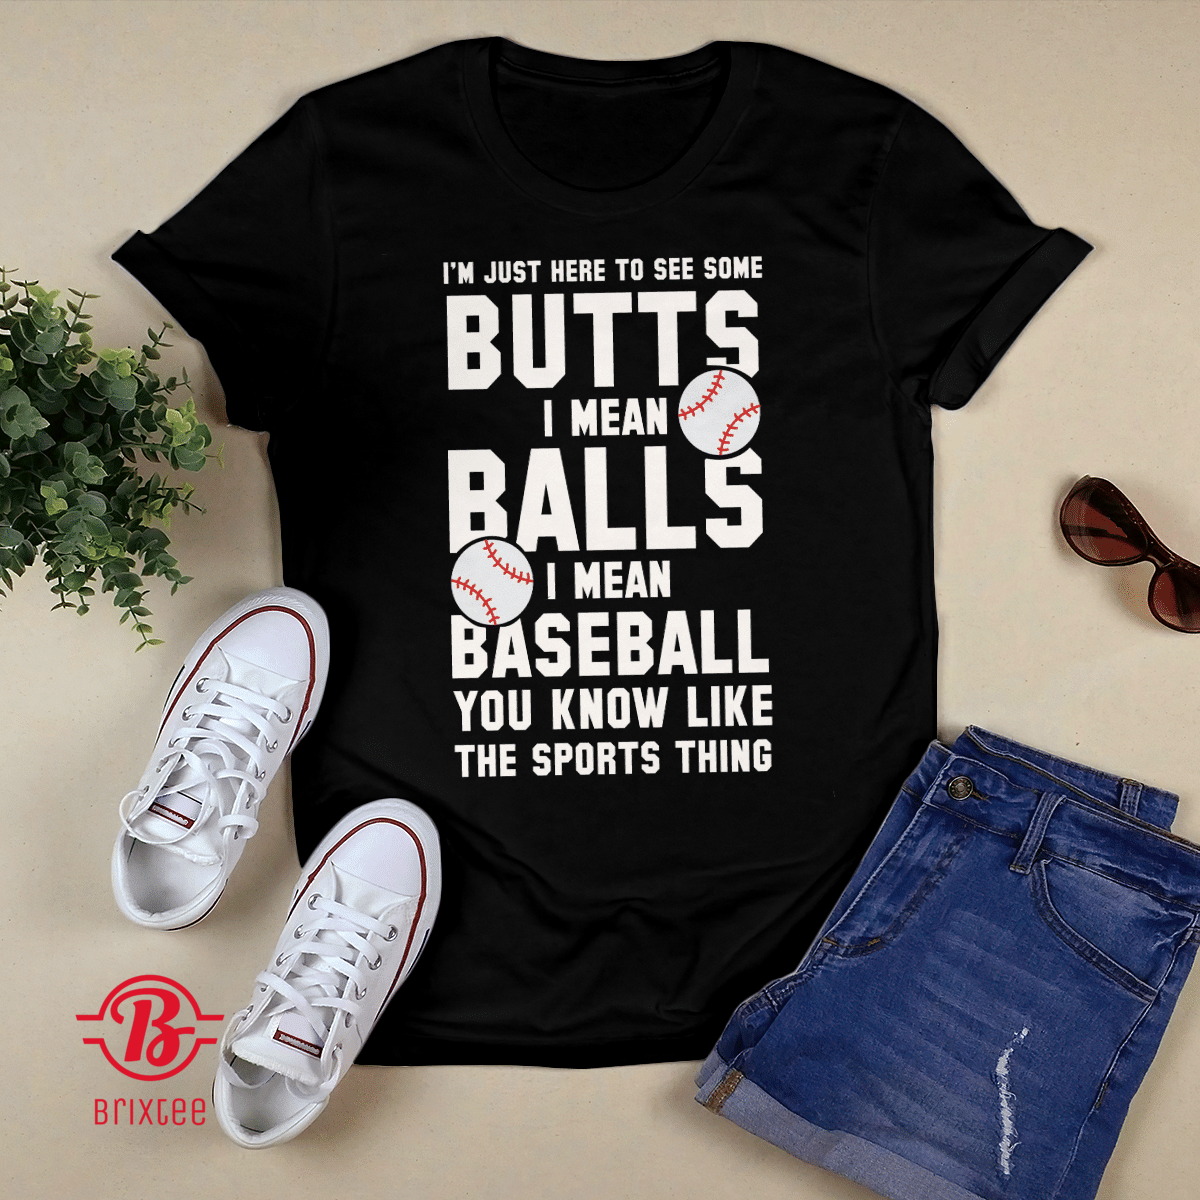  I'm Just Here To See Some Butts, I Mean Balls, I Mean Baseball 